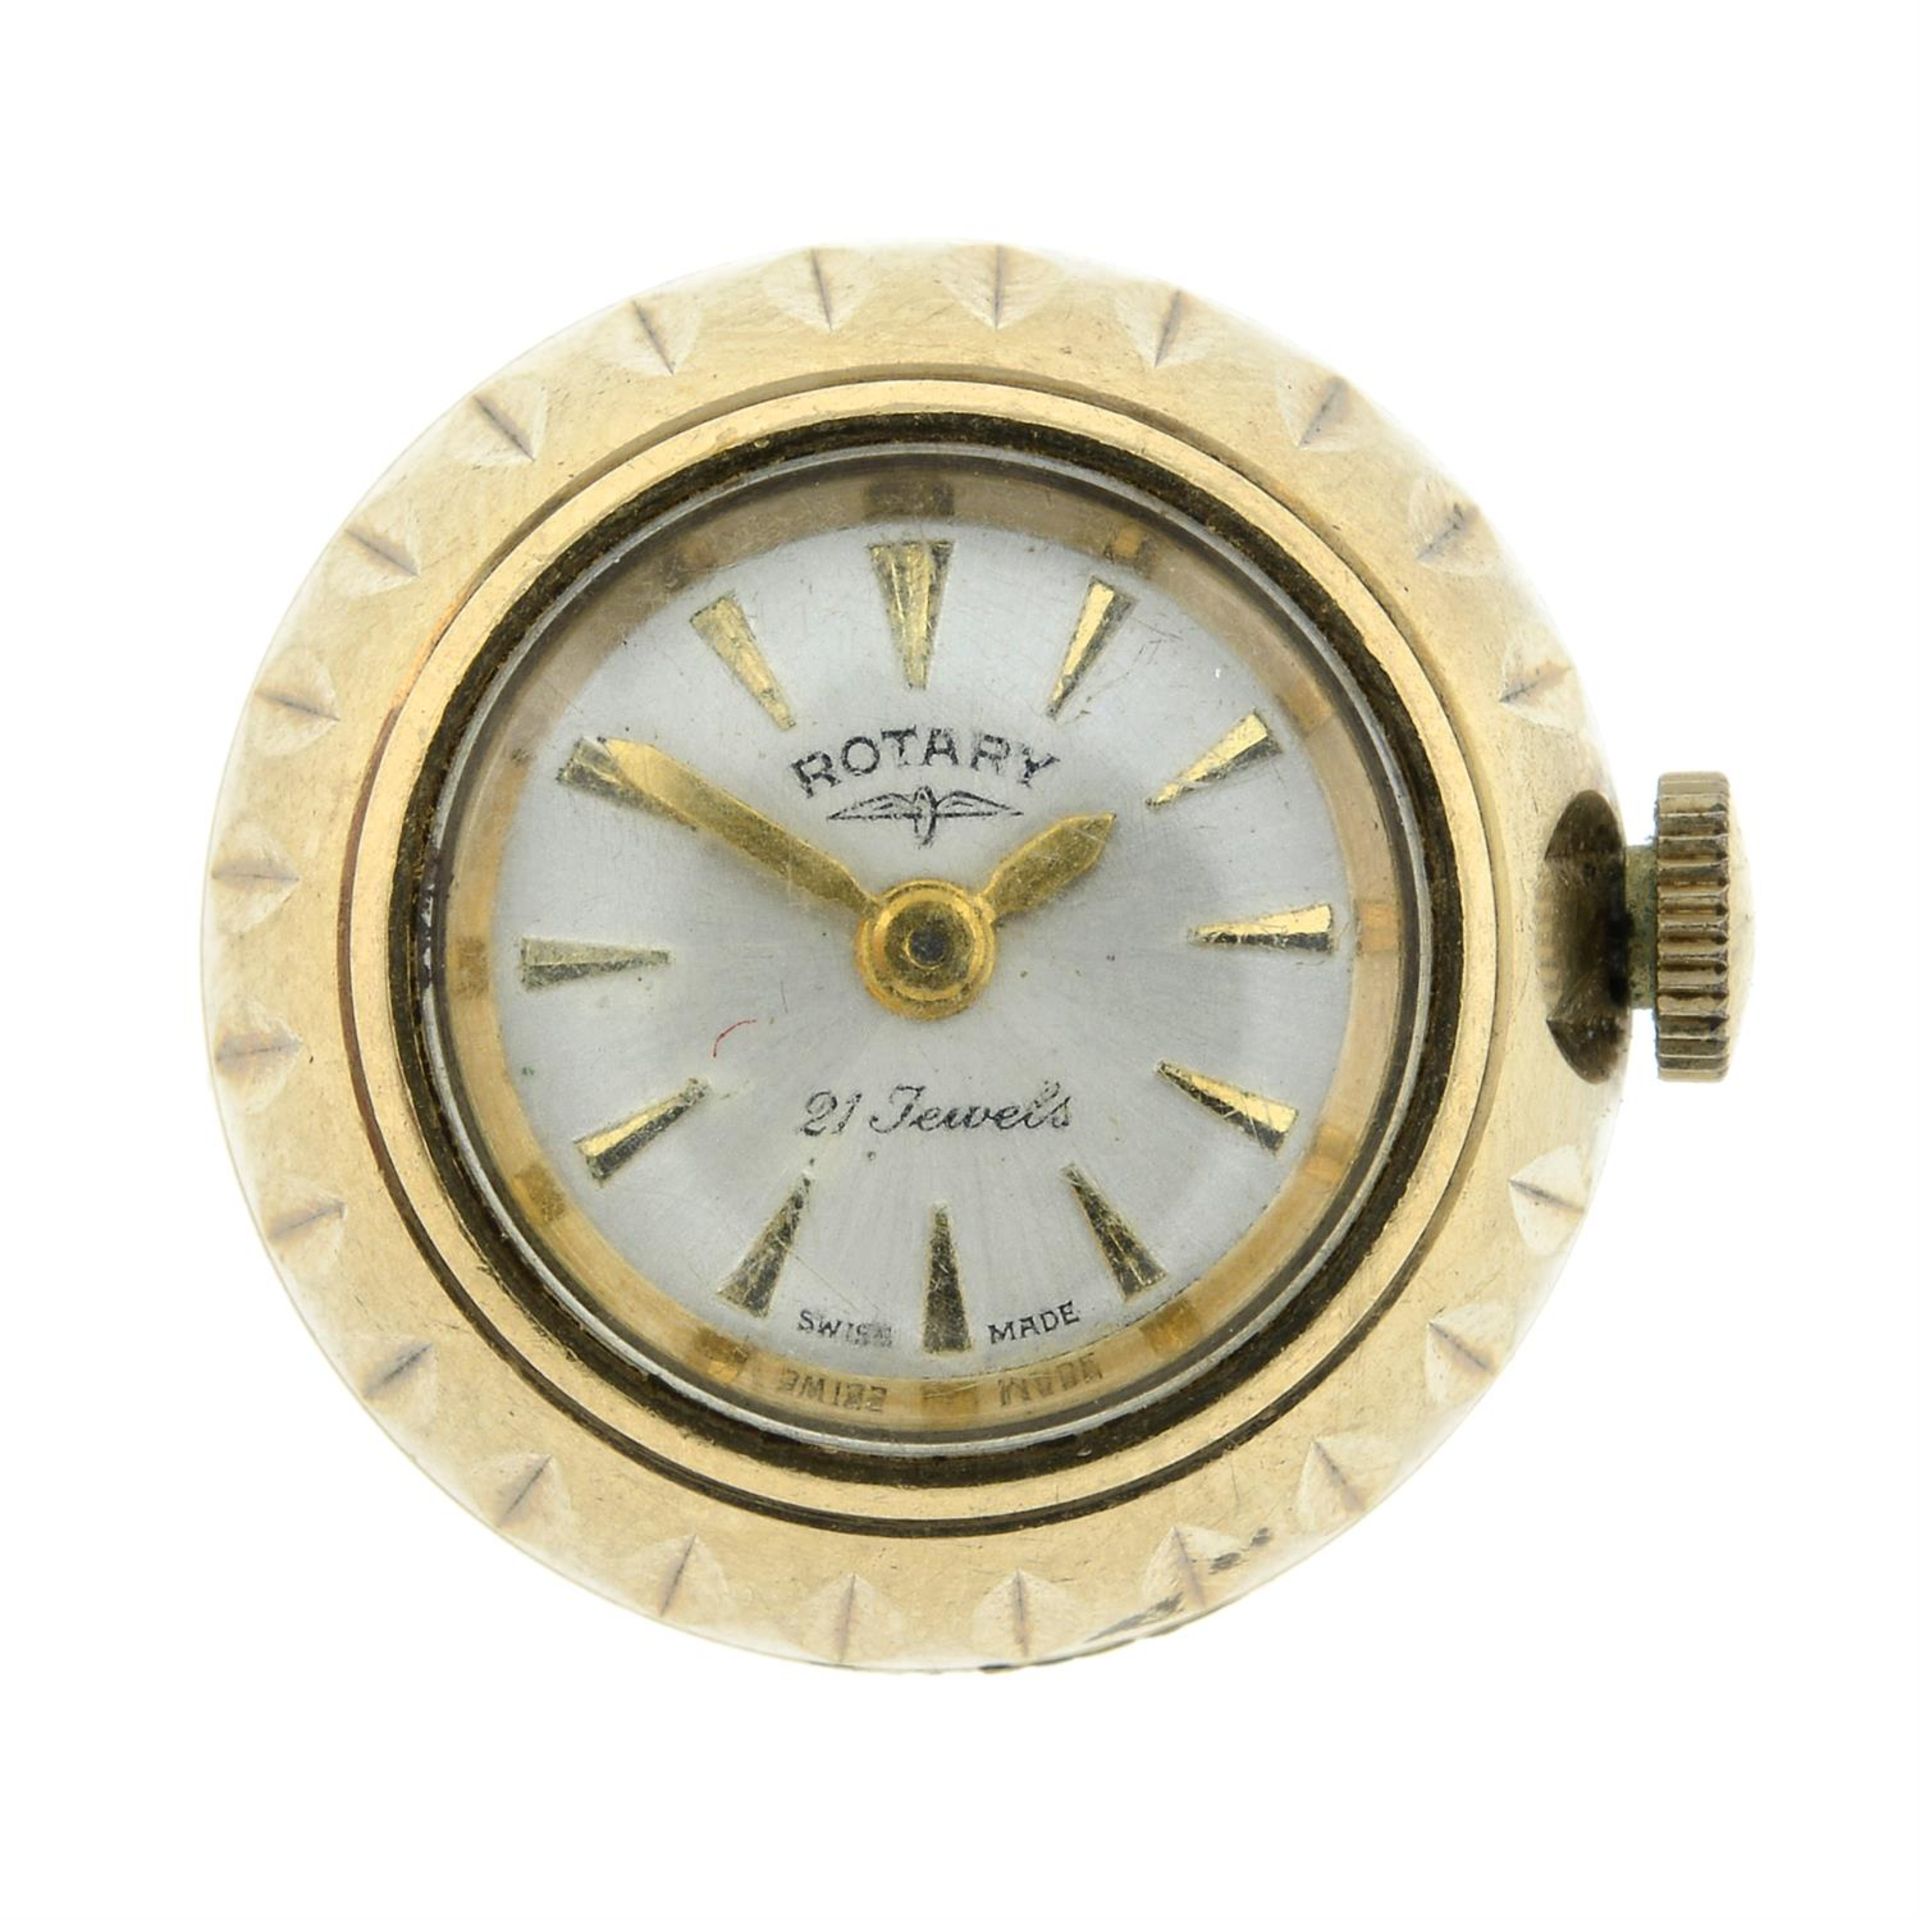 A pendant watch, by Rotary.